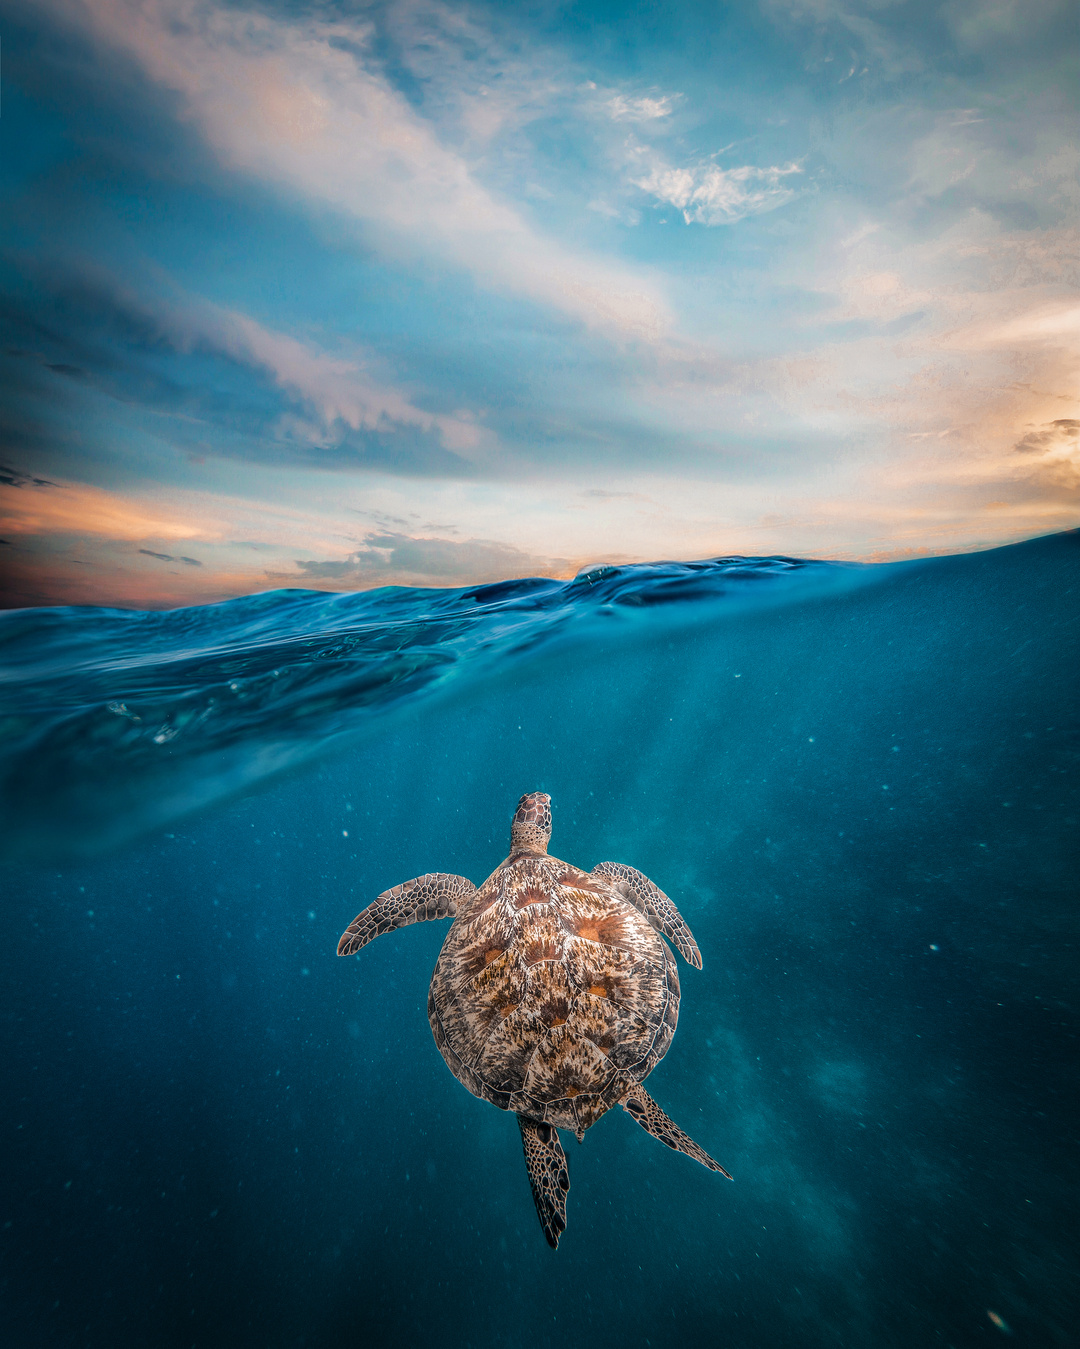 A Turtle Submerged in Blue Water